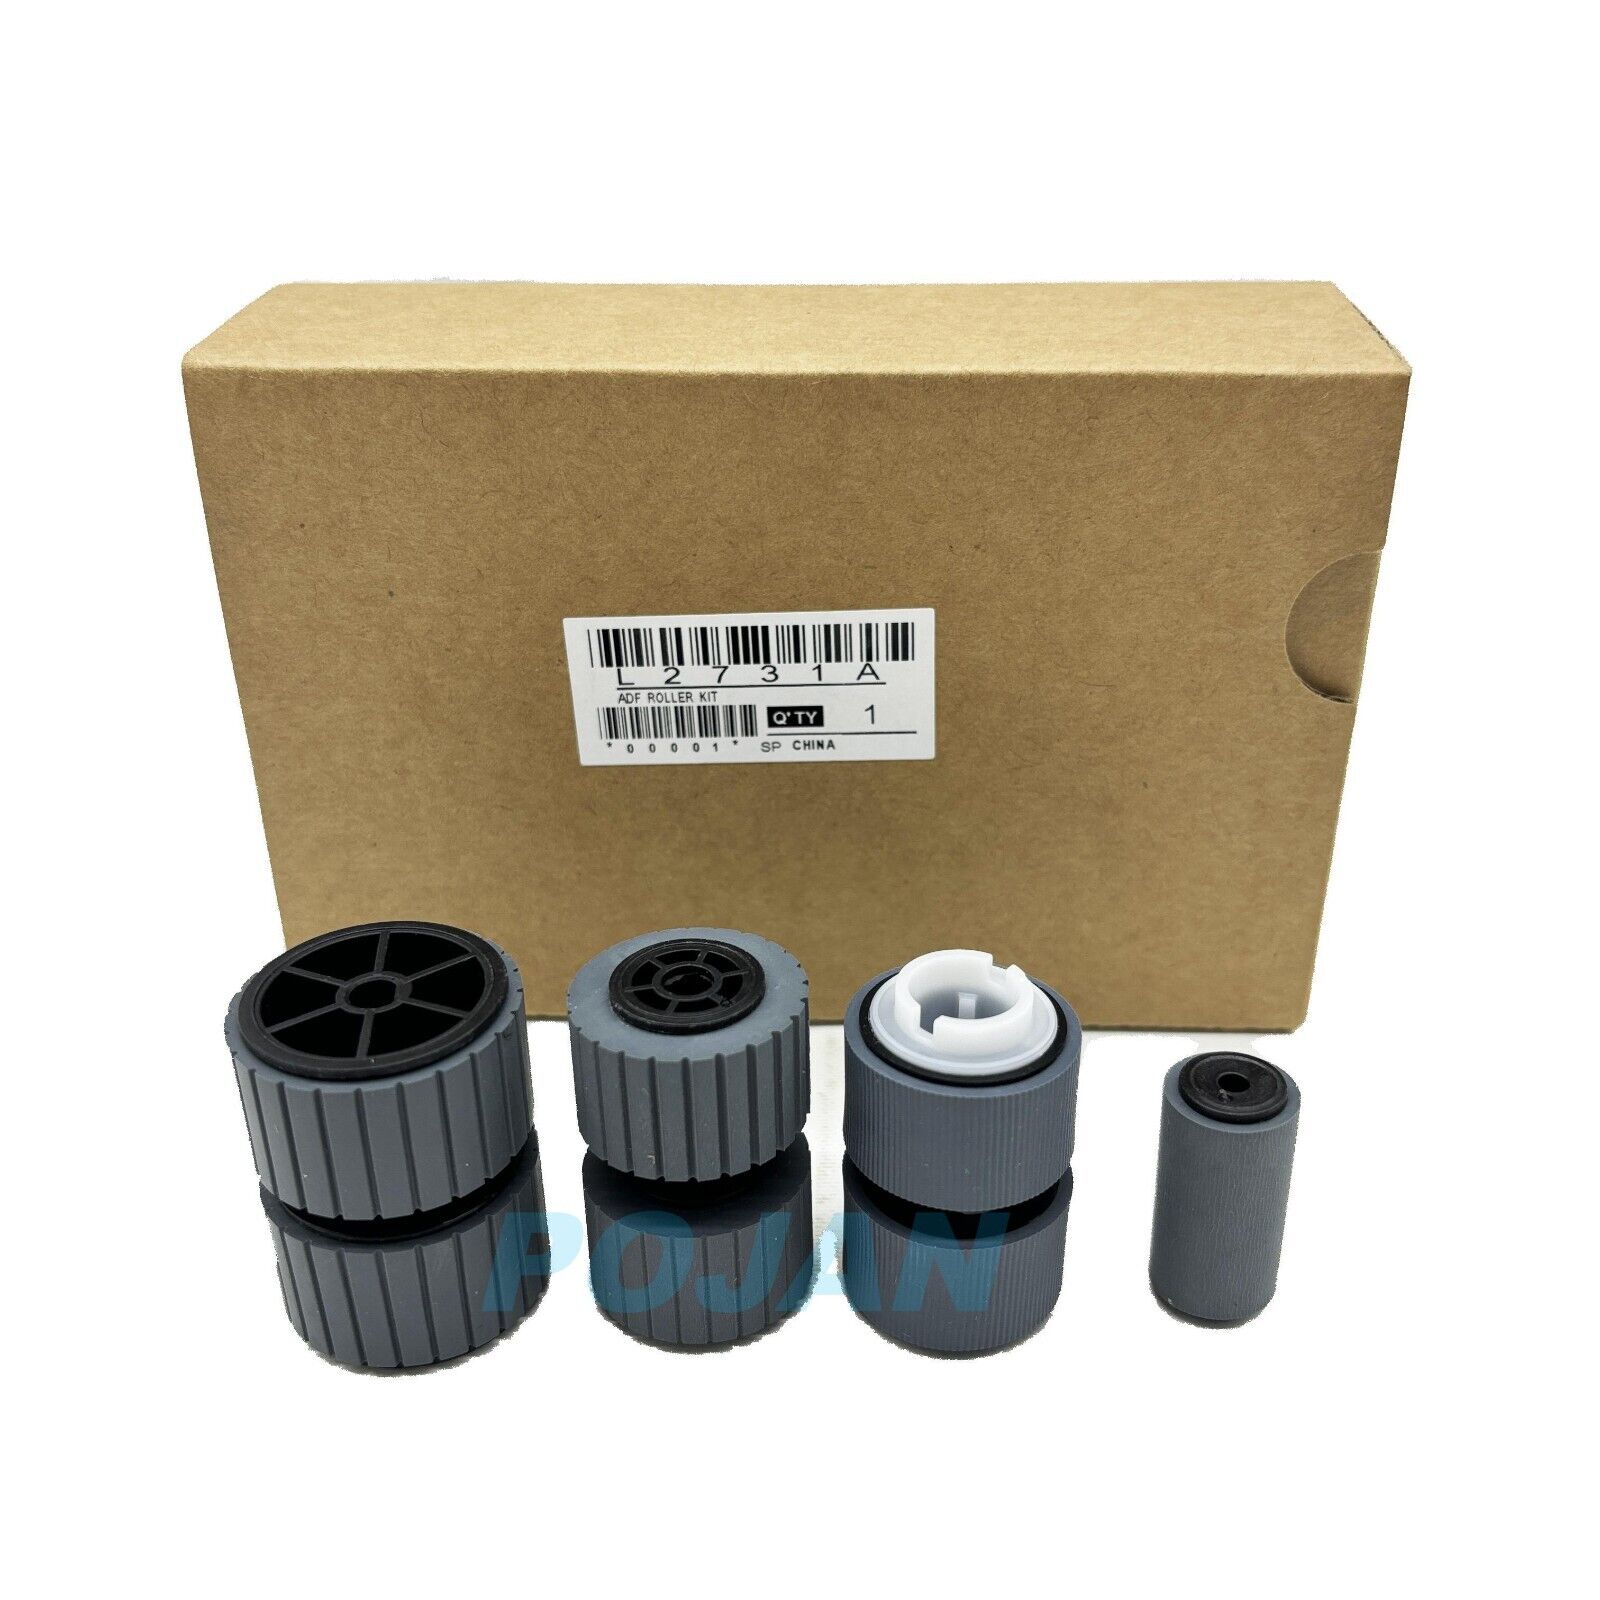 L2731A ADF Roller Replacement Kit For HP ScanJet 5000 S3 5000 S2 7000 S2